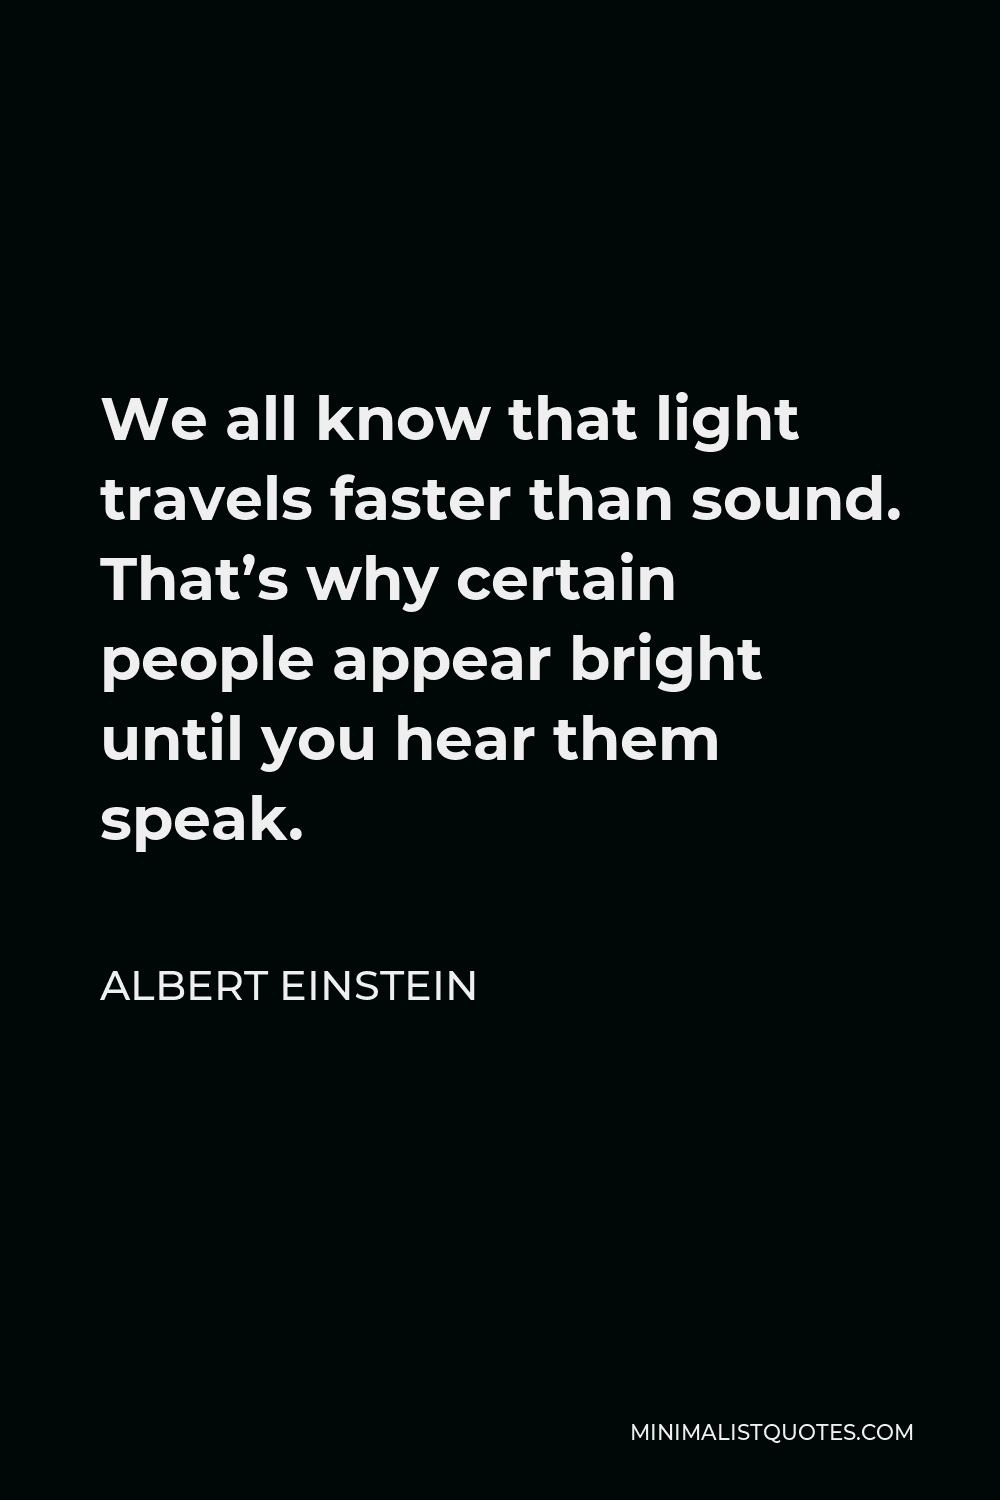 Albert Einstein Quote - We all know that light travels faster than sound. That’s why certain people appear bright until you hear them speak.